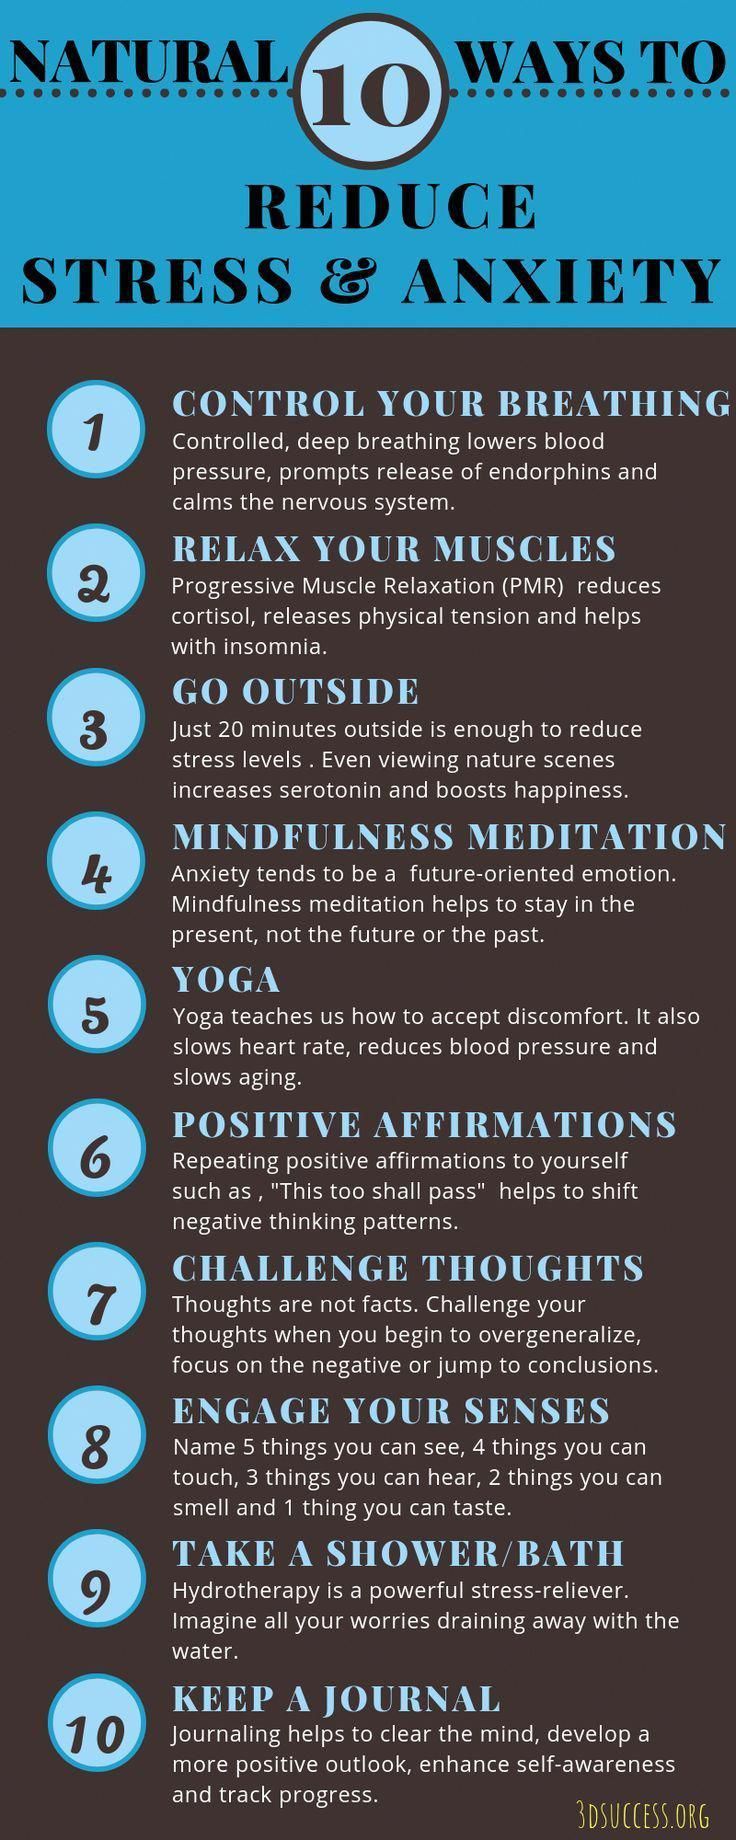 1572231813_205_Psychology-Infographic-10-Natural-Ways-to-Reduce-Stress Psychology Infographic : 10 Natural Ways to Reduce Stress & Anxiety Infographic #herbalremedies